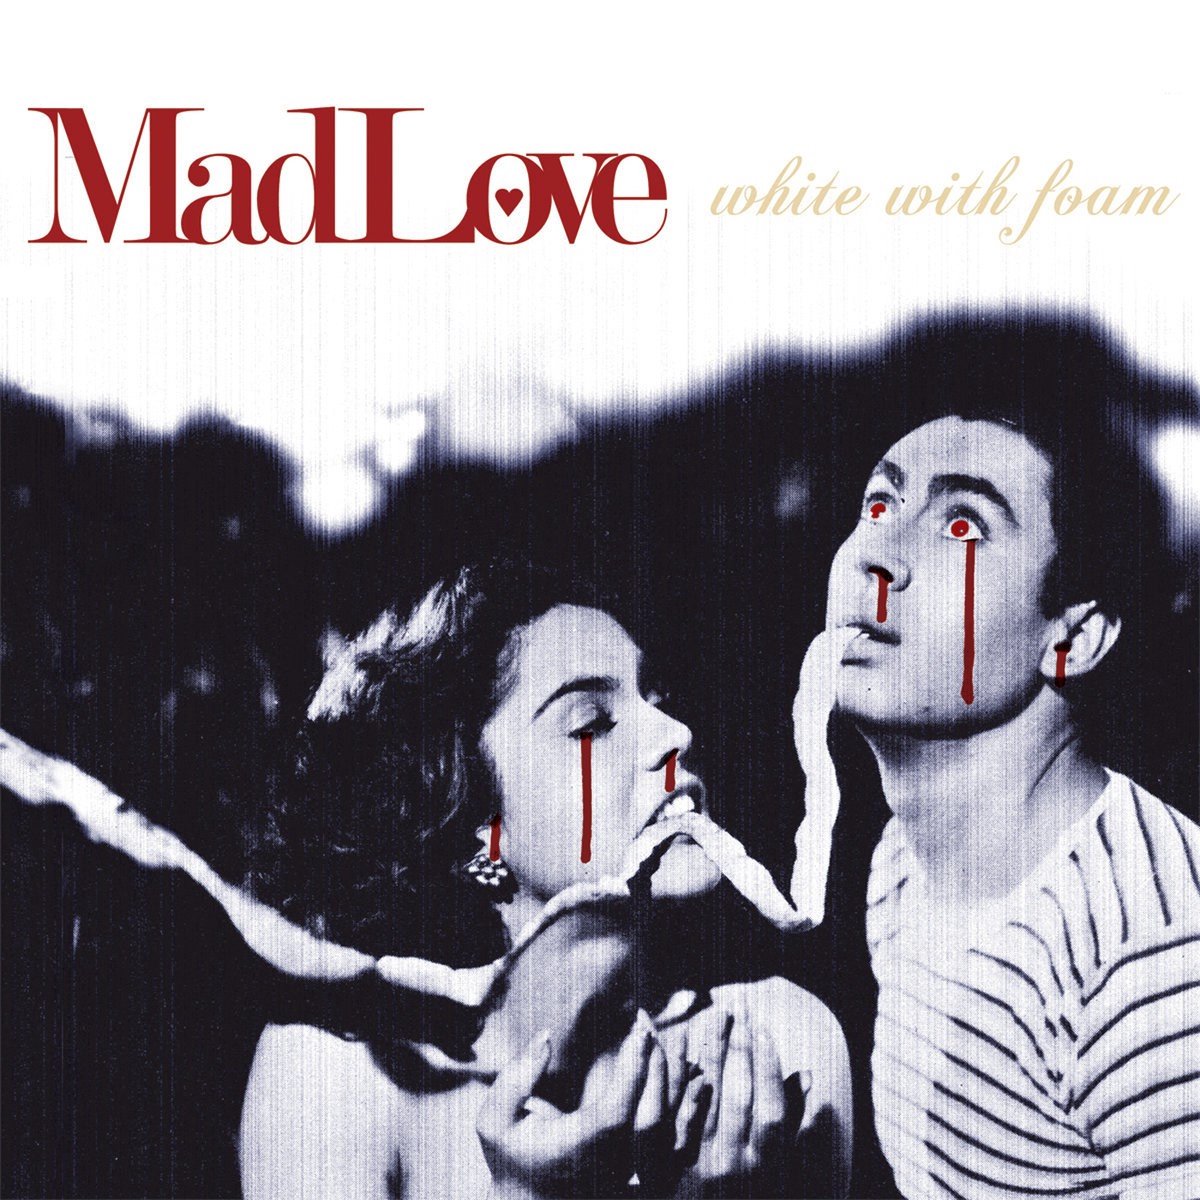 Mad Love - White With Foam (CD)